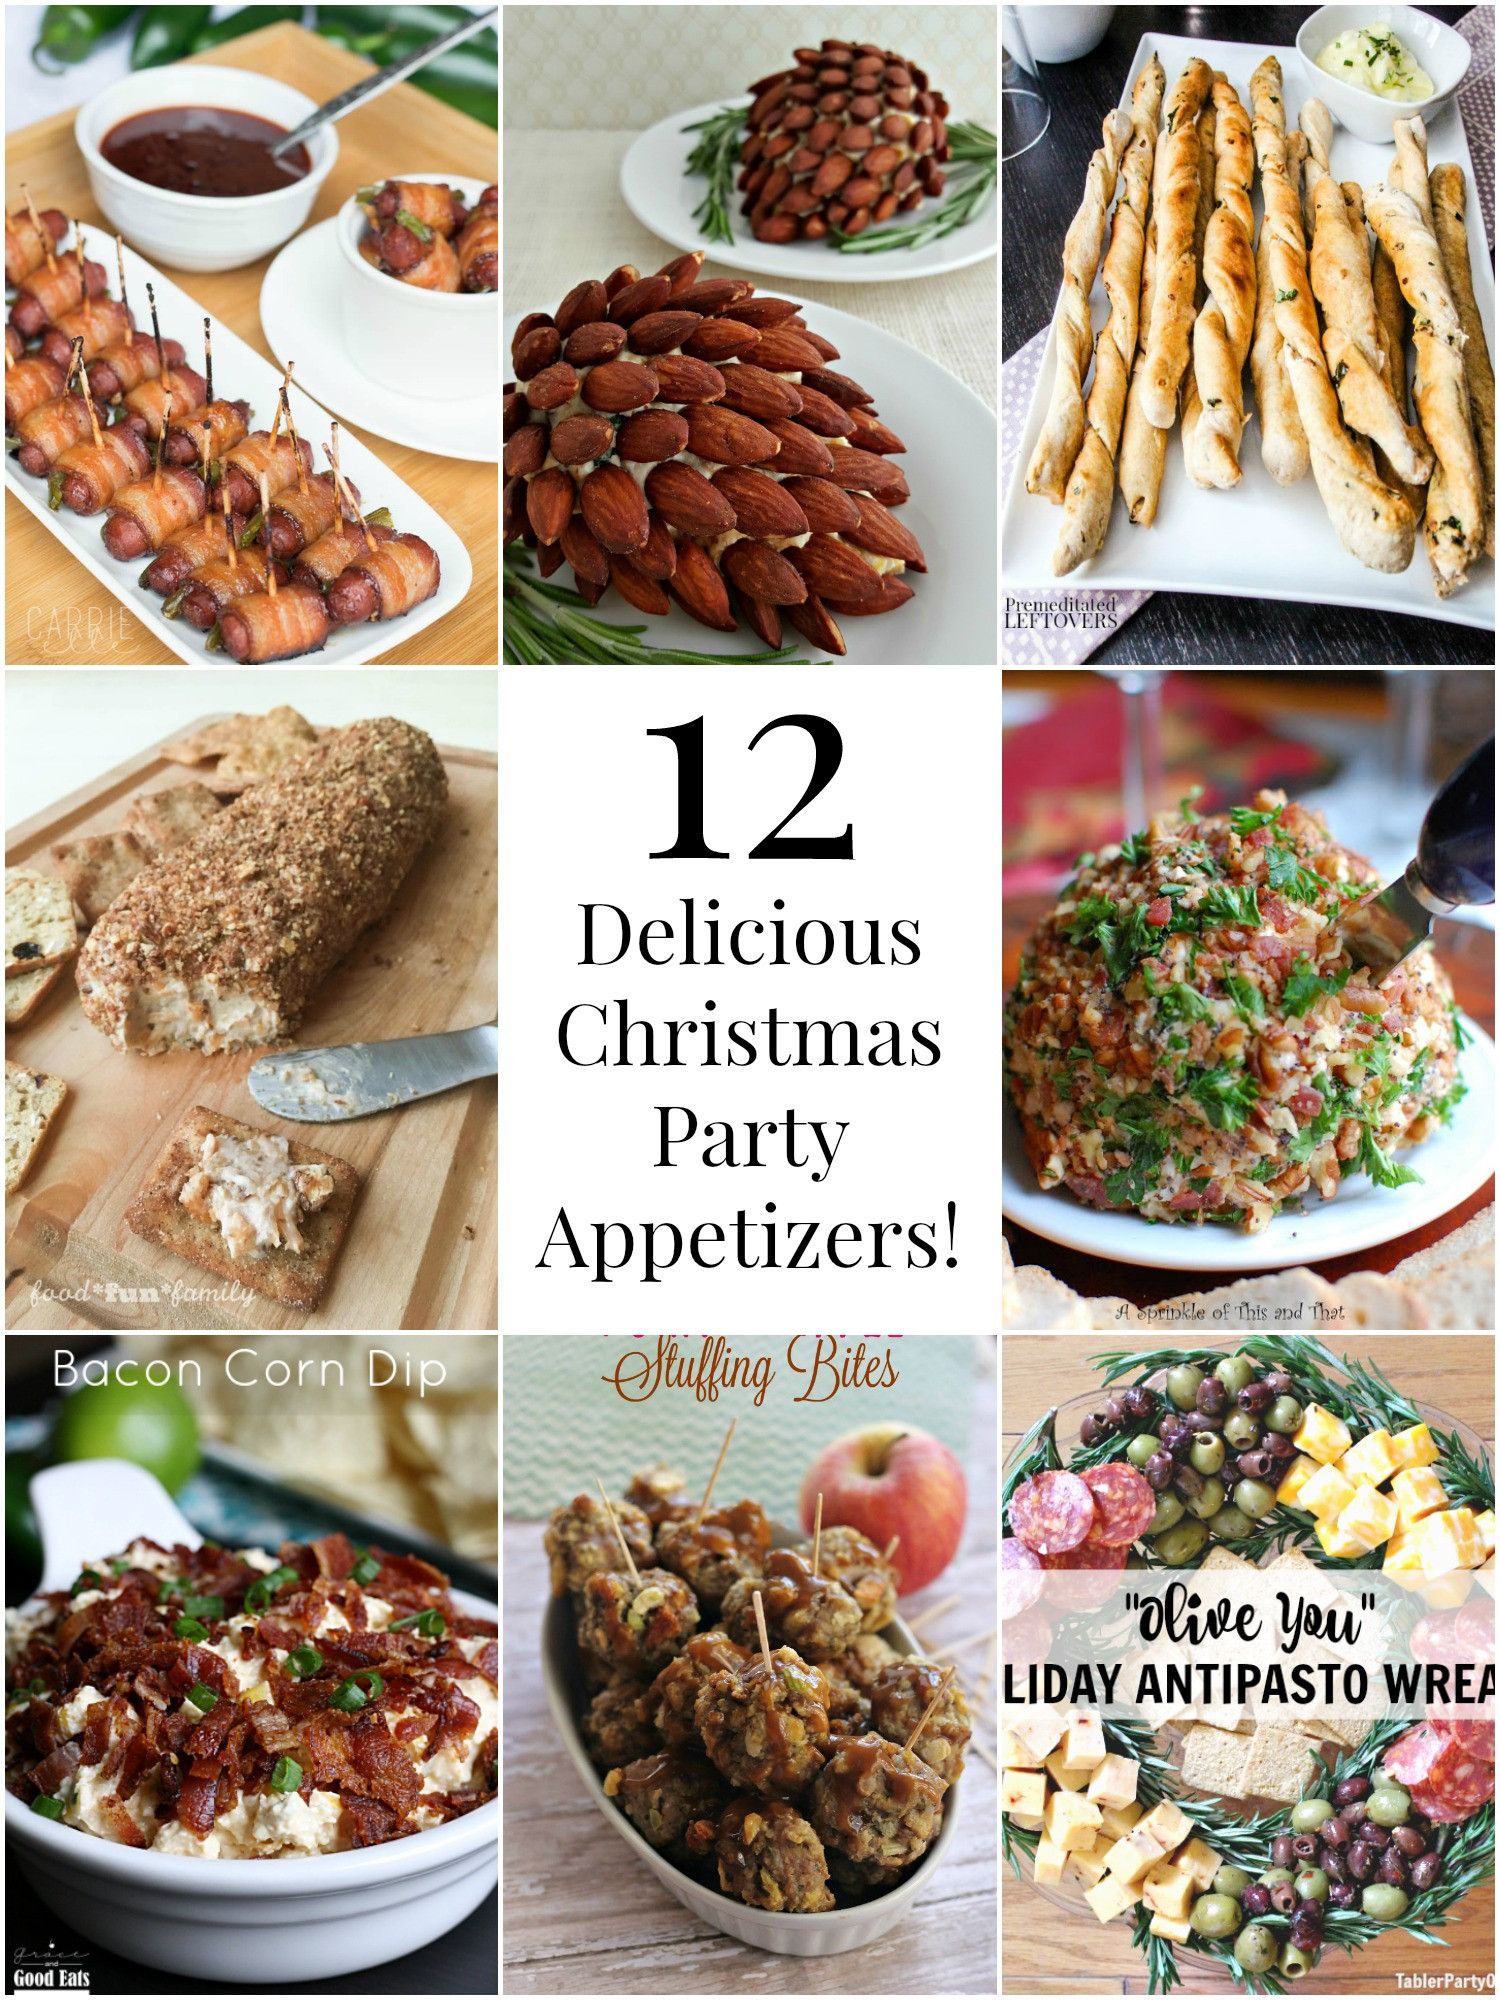 Holiday Party Appetizers Ideas
 So Creative 12 Delicious Christmas Party Appetizers